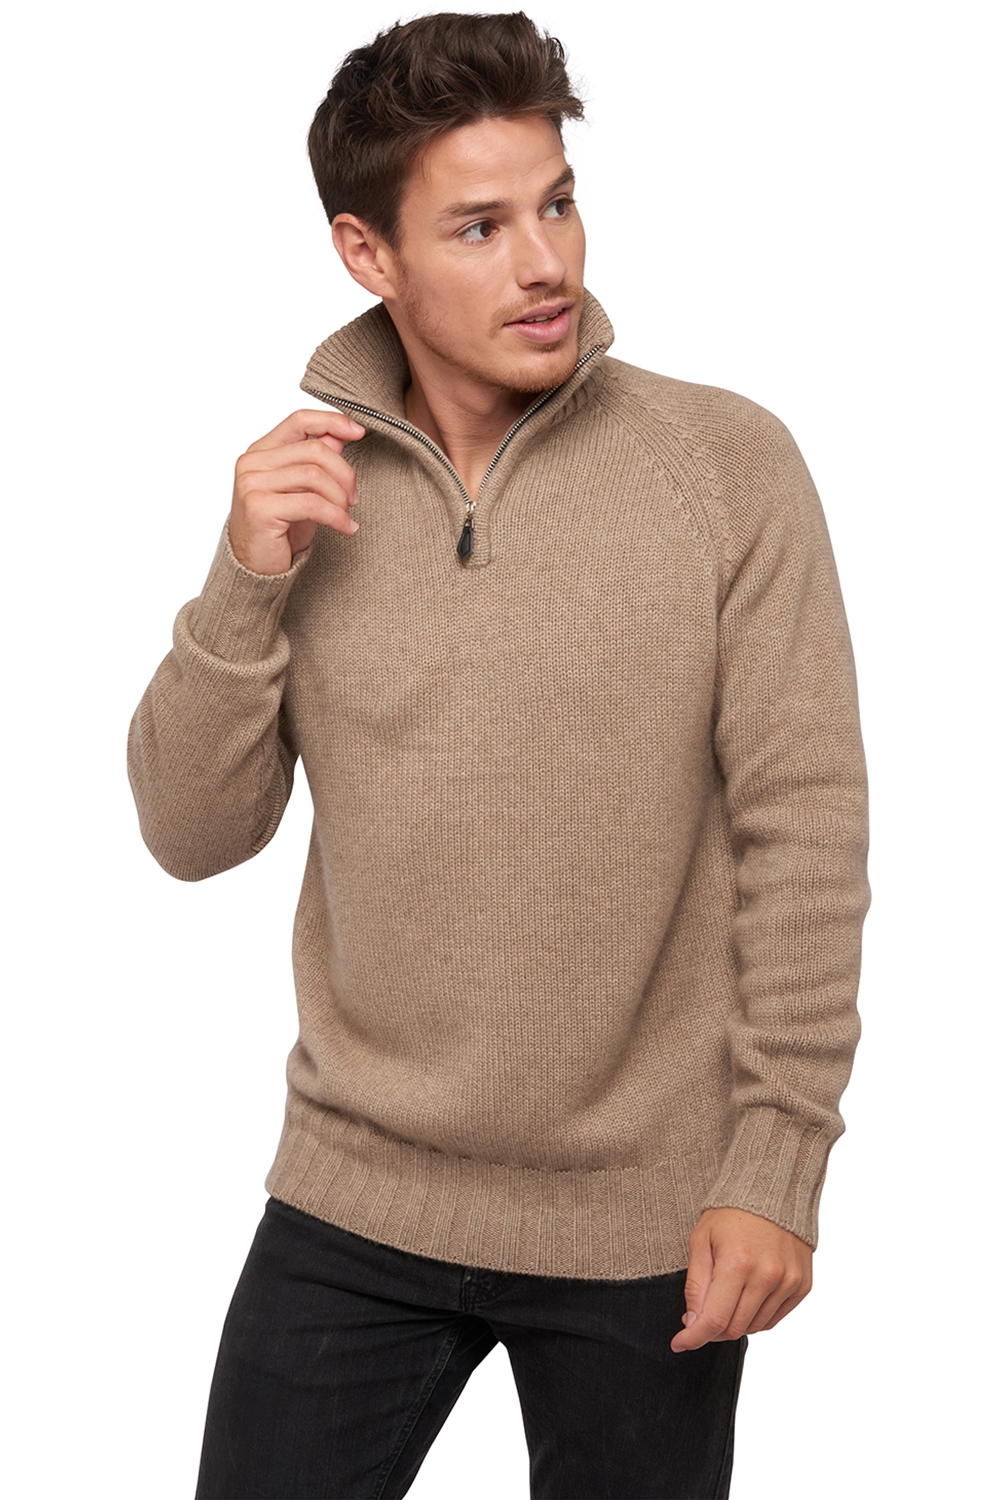  men polo style sweaters natural viero natural stone 3xl